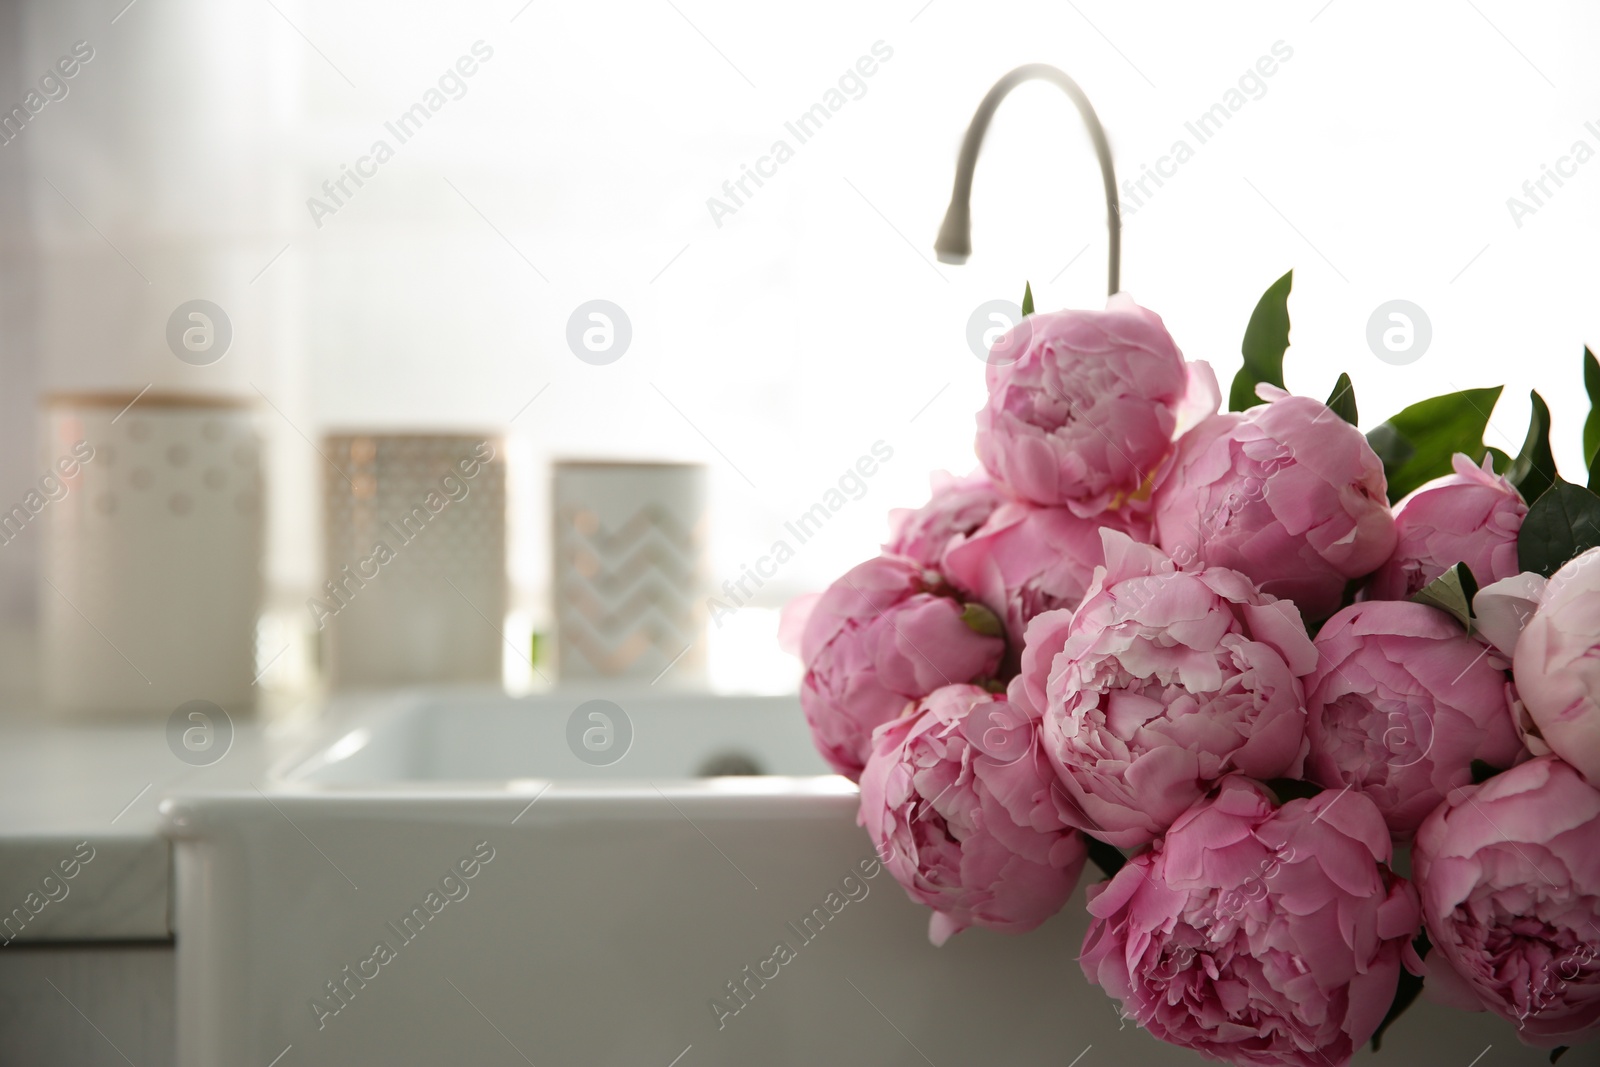 Photo of Bouquet of beautiful pink peonies in kitchen sink. Space for text